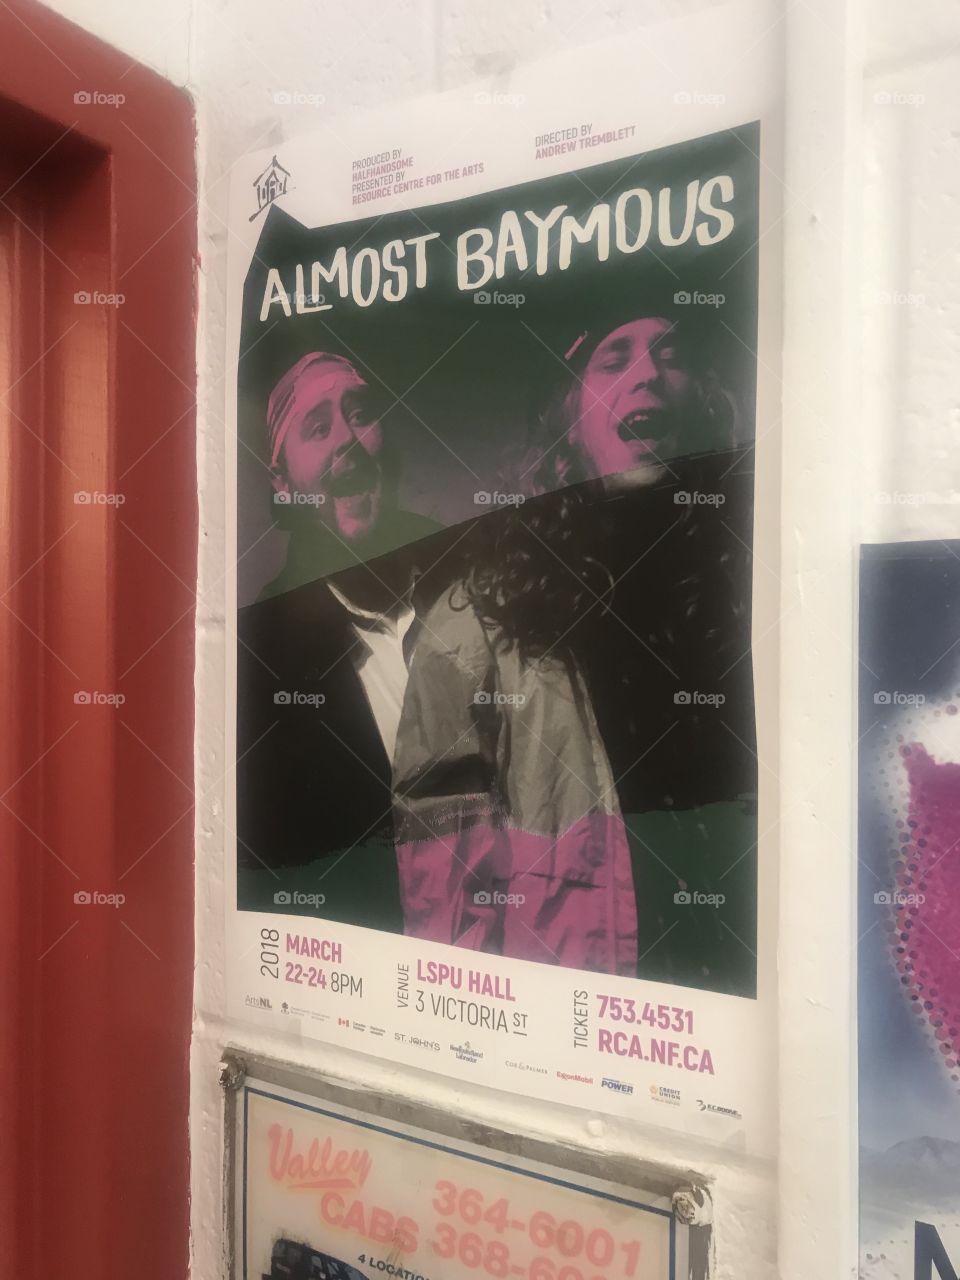 A poster for a local comedy play set in rural Newfoundland and Labrador, which is a play on the title of the American 1990’s film “almost famous.” It’s a critically acclaimed independent theatre production that employs many local artisans and actors